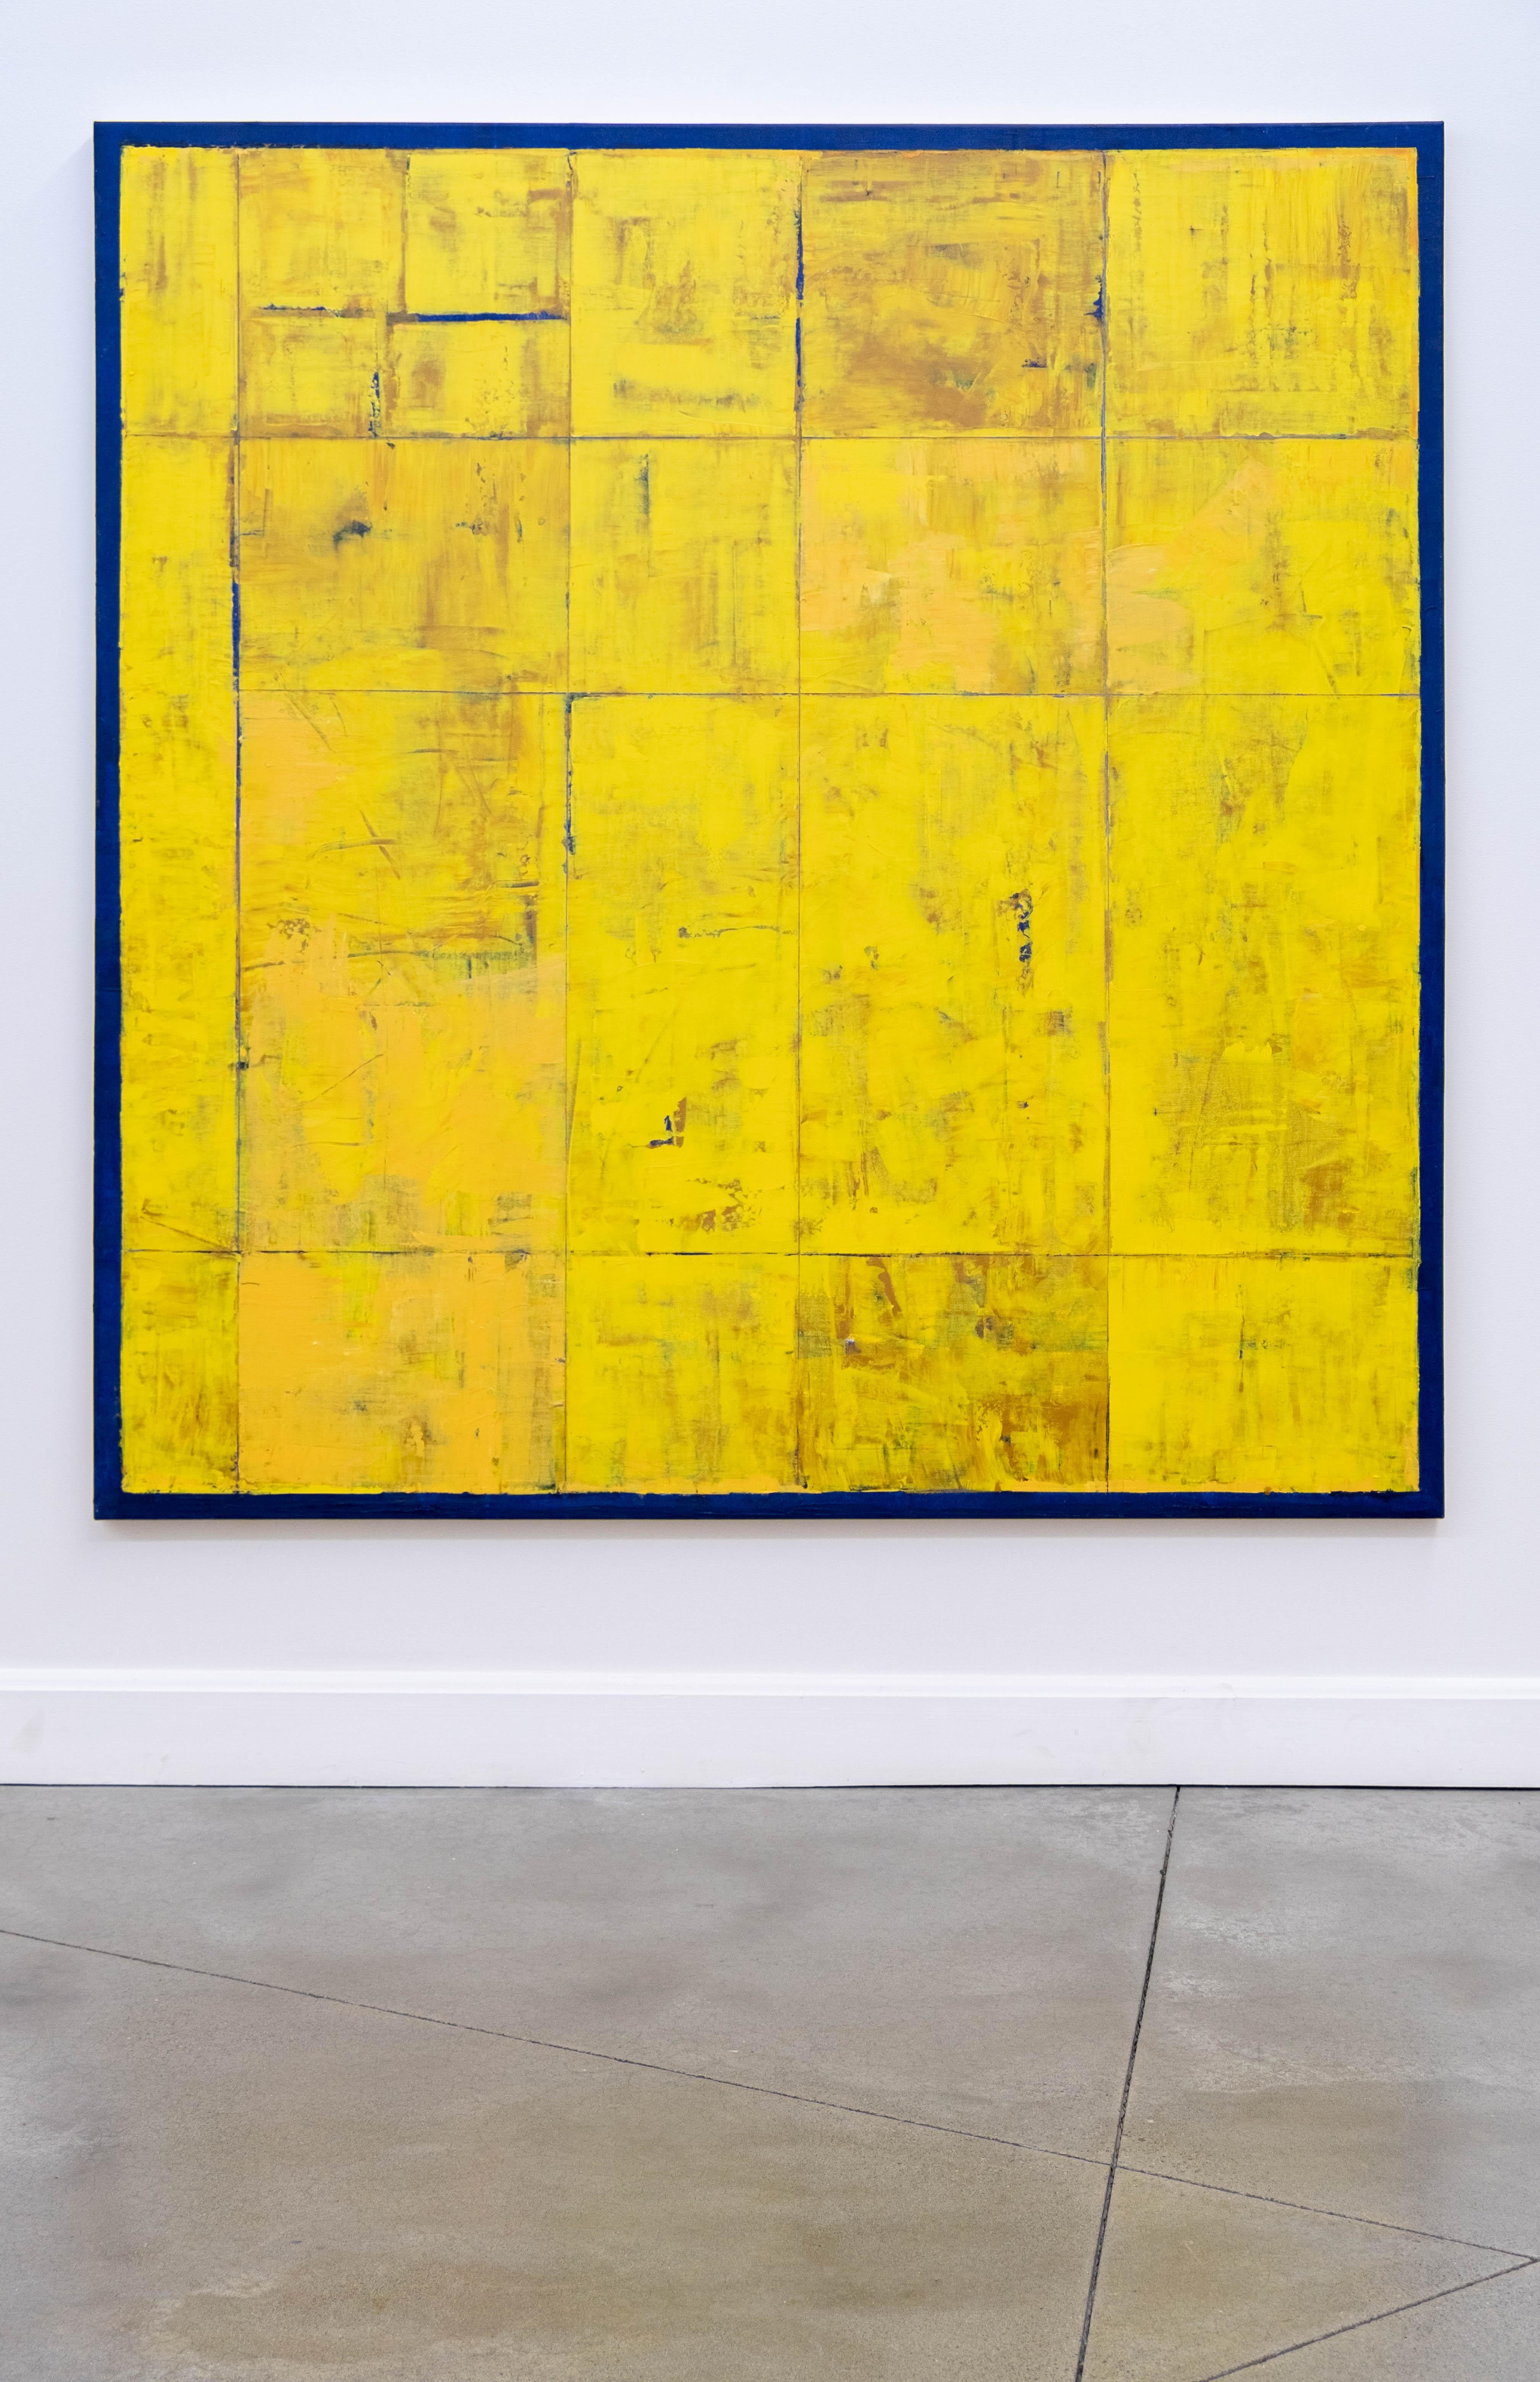 Amida - large, bright, colorful, yellow, abstract grid, modernist, oil on canvas - Contemporary Painting by David Sorensen